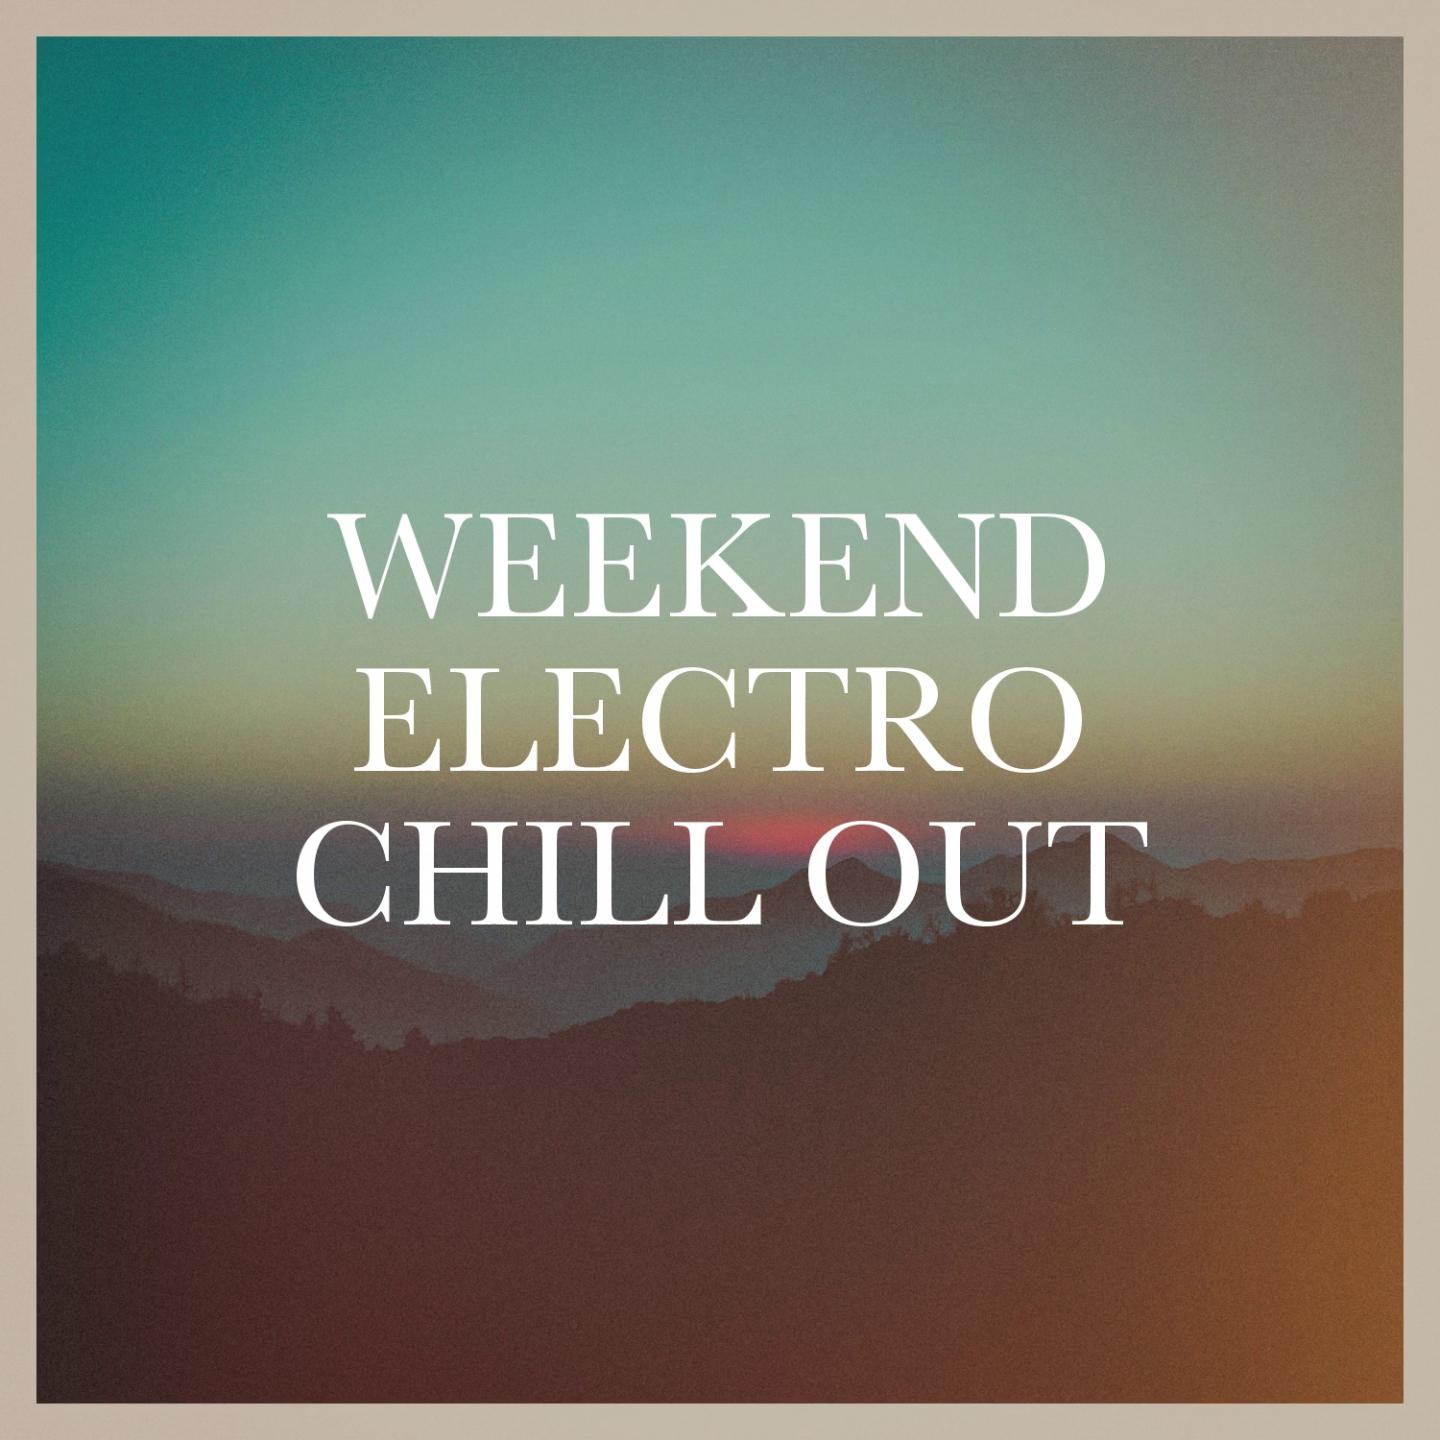 Weekend electro chill out